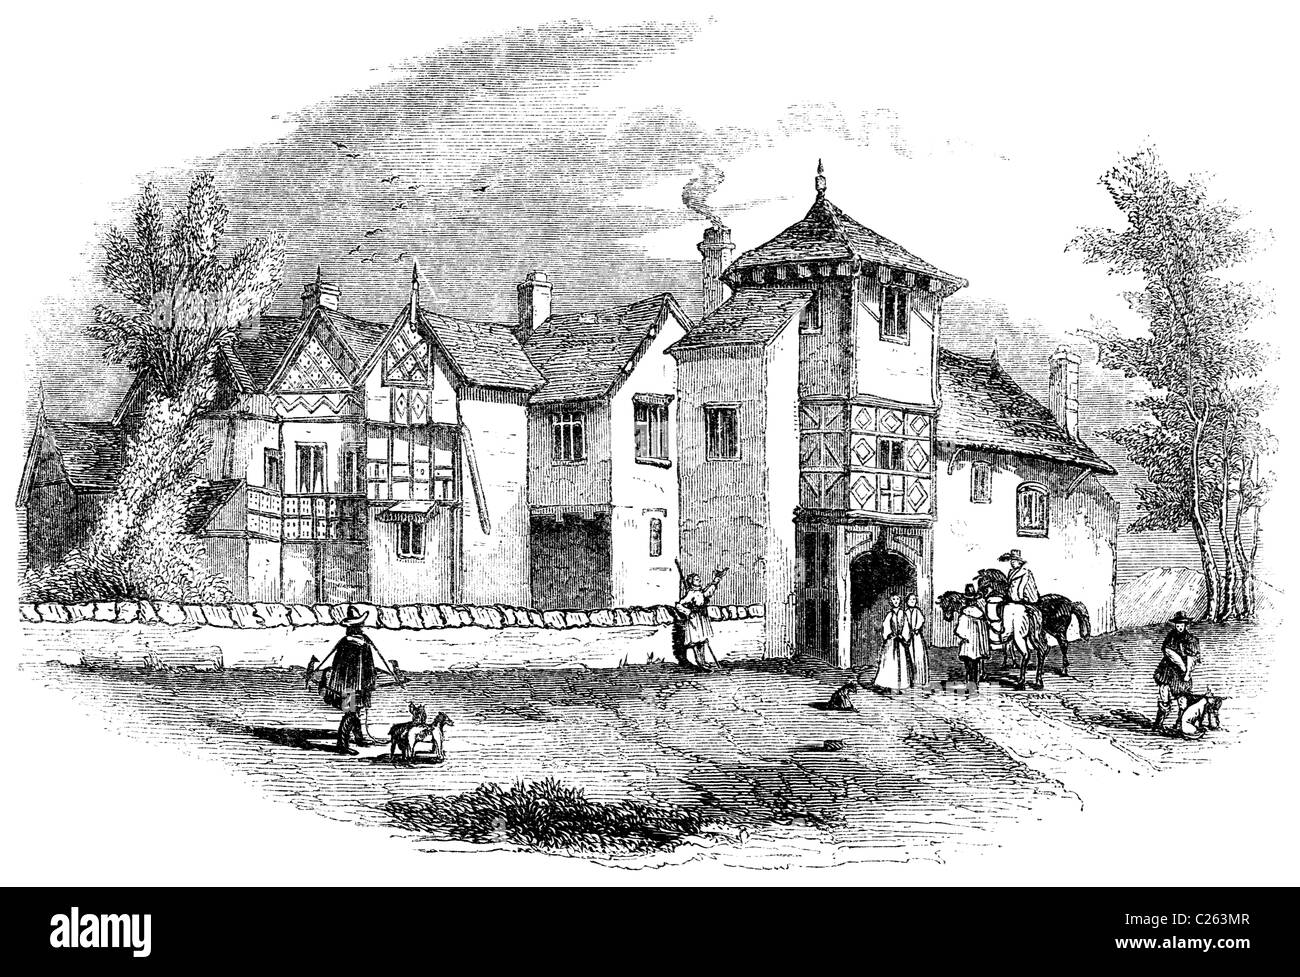 Hulme Hall, Lancashire, 16th Century Mansion, from 1840s wood engraving Stock Photo